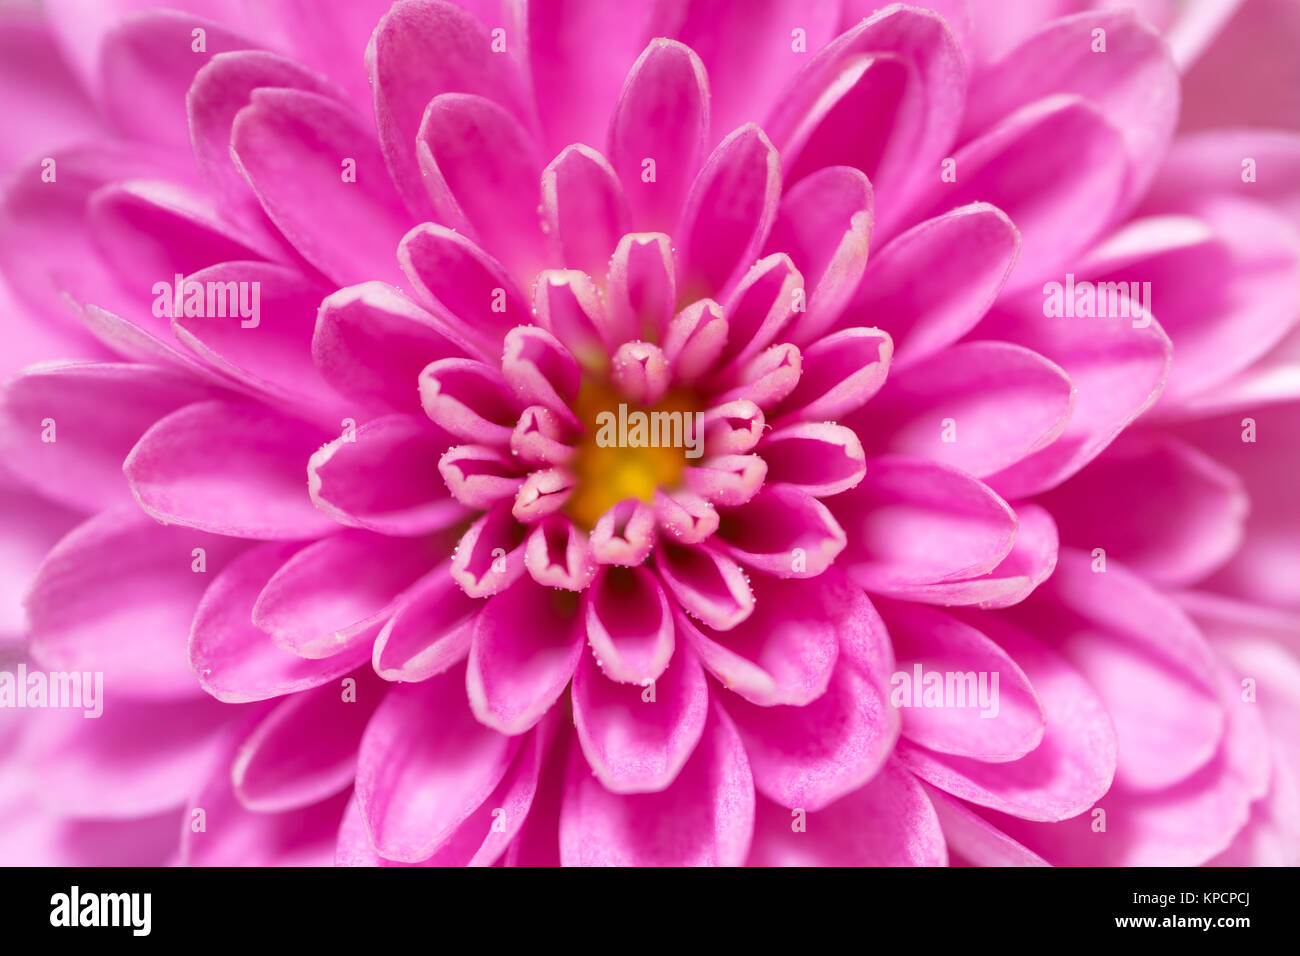 Soft Focus Chrysanthemum flower center, pink and purple, super macro closeup texture and pattern, petals showing and flower center Stock Photo